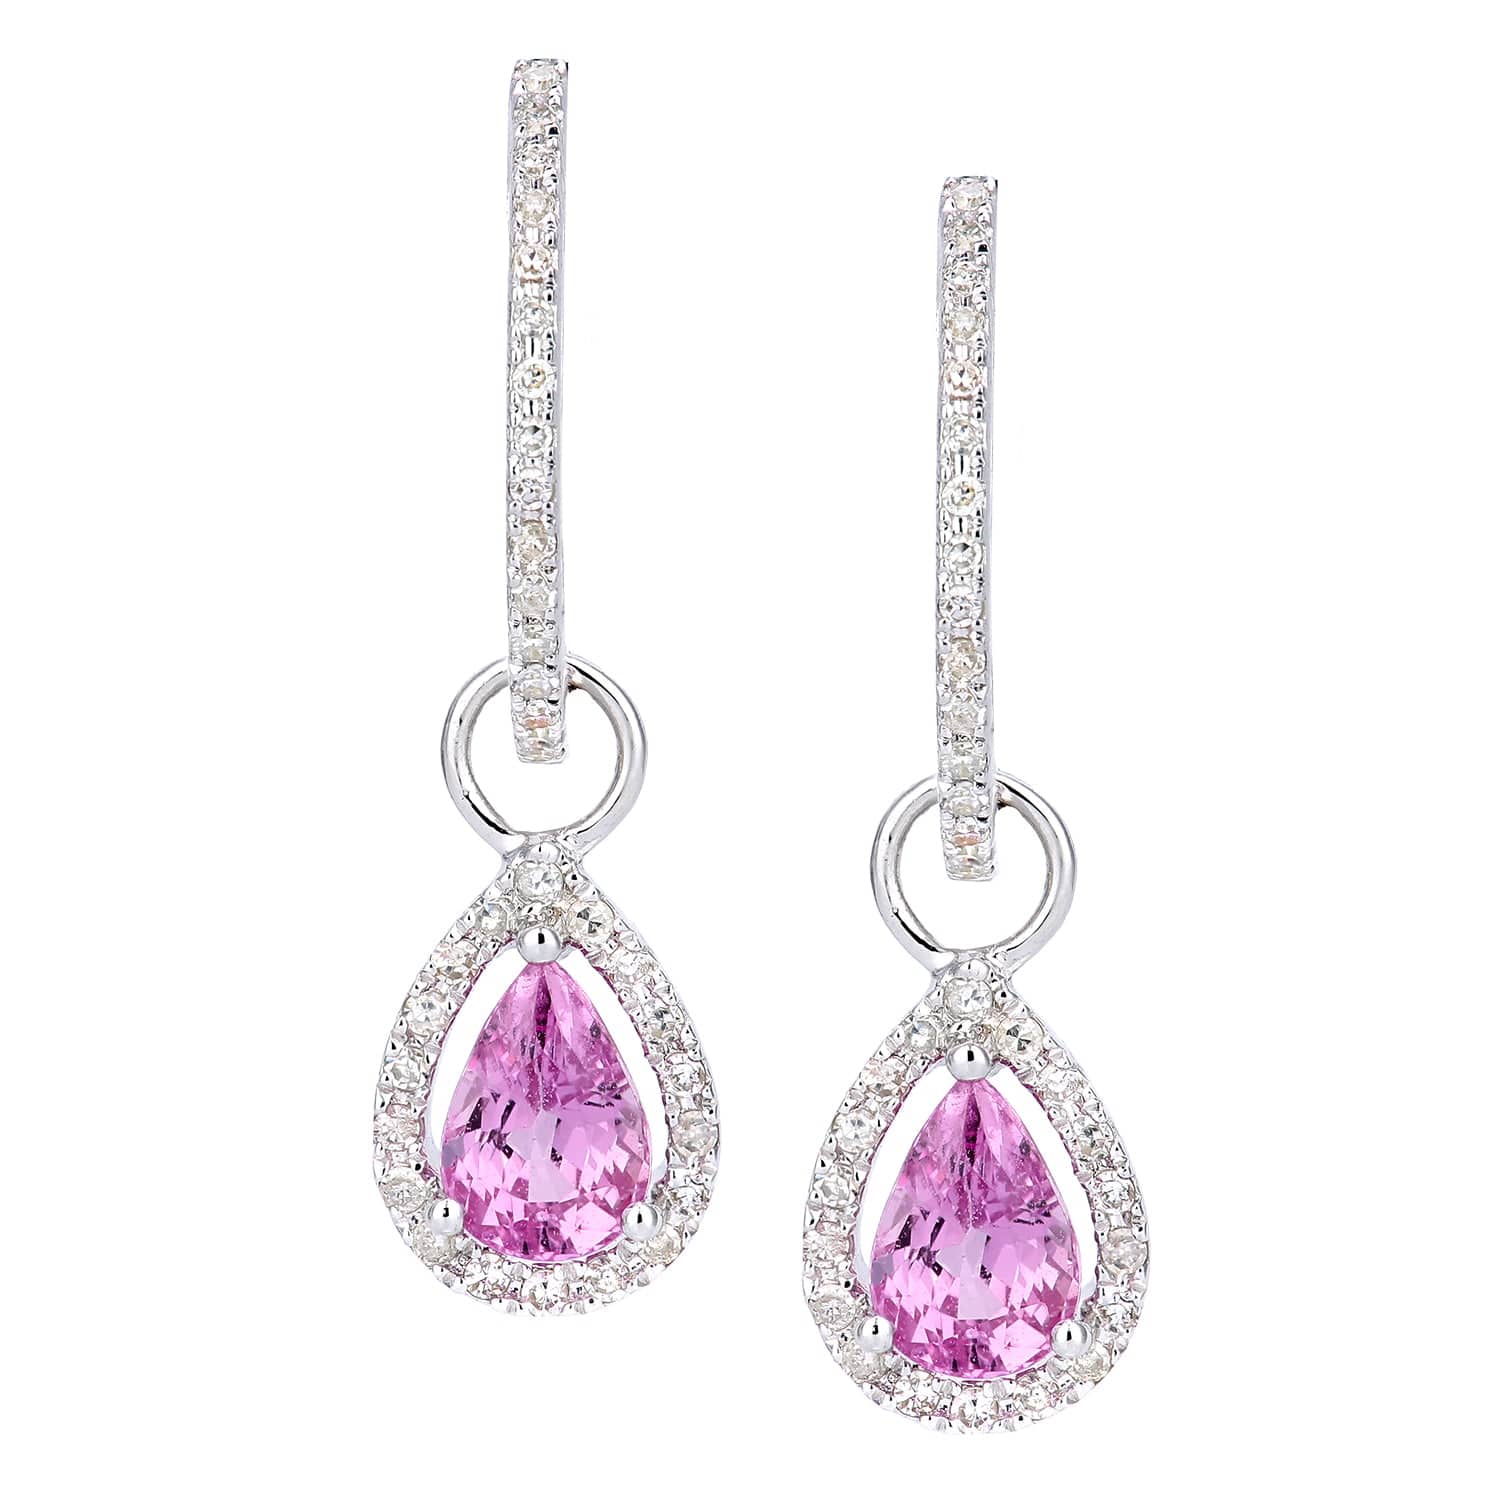 Lynora Luxe Earring White Gold 9ct / Pink Sapphire 9ct White Gold Created Pink Sapphire Teardrop and Diamond Halo Earrings